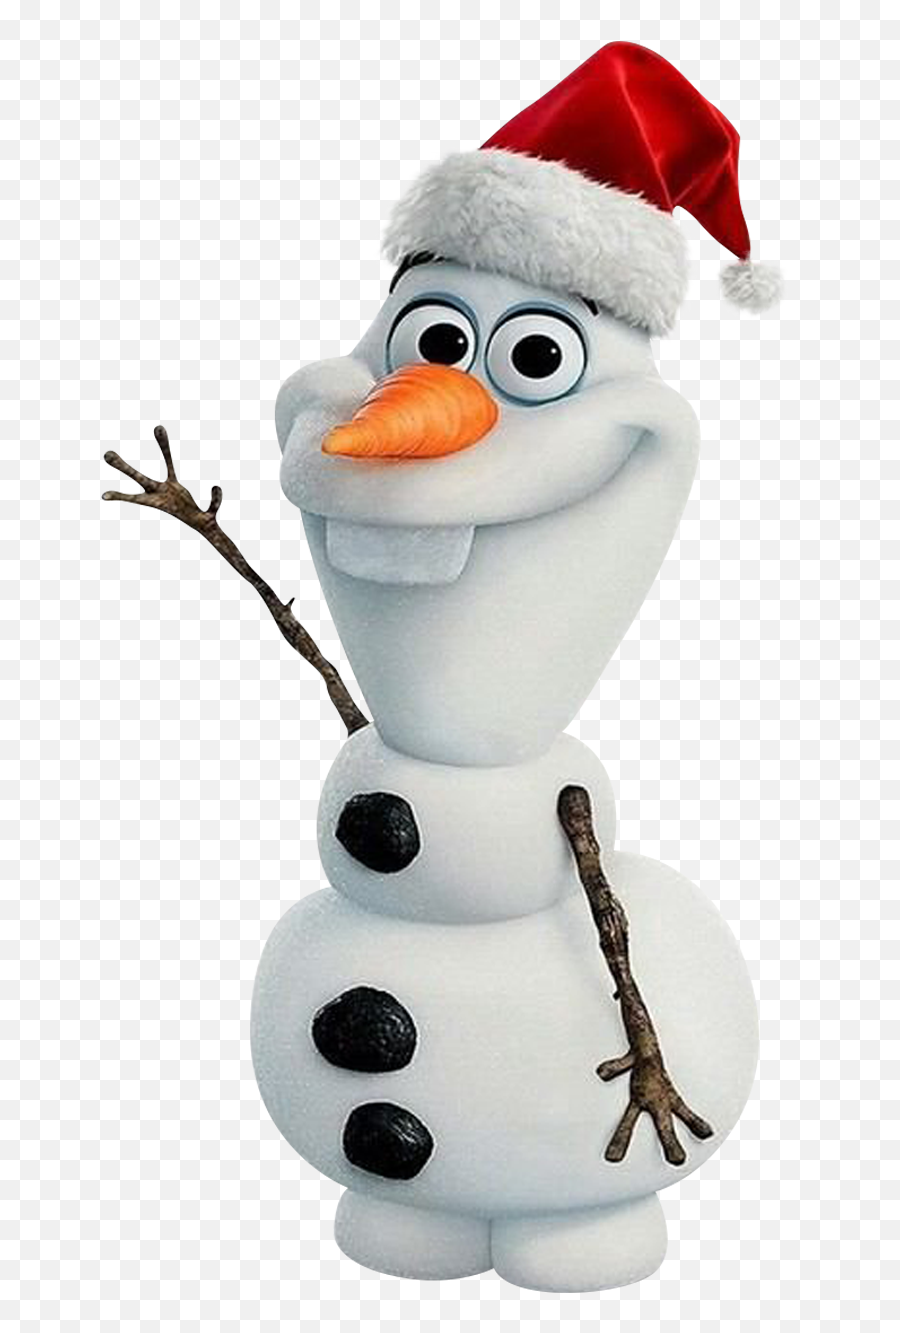 Frozen Olaf Png Pic Mart - Merry Christmas Olaf,Elsa Png